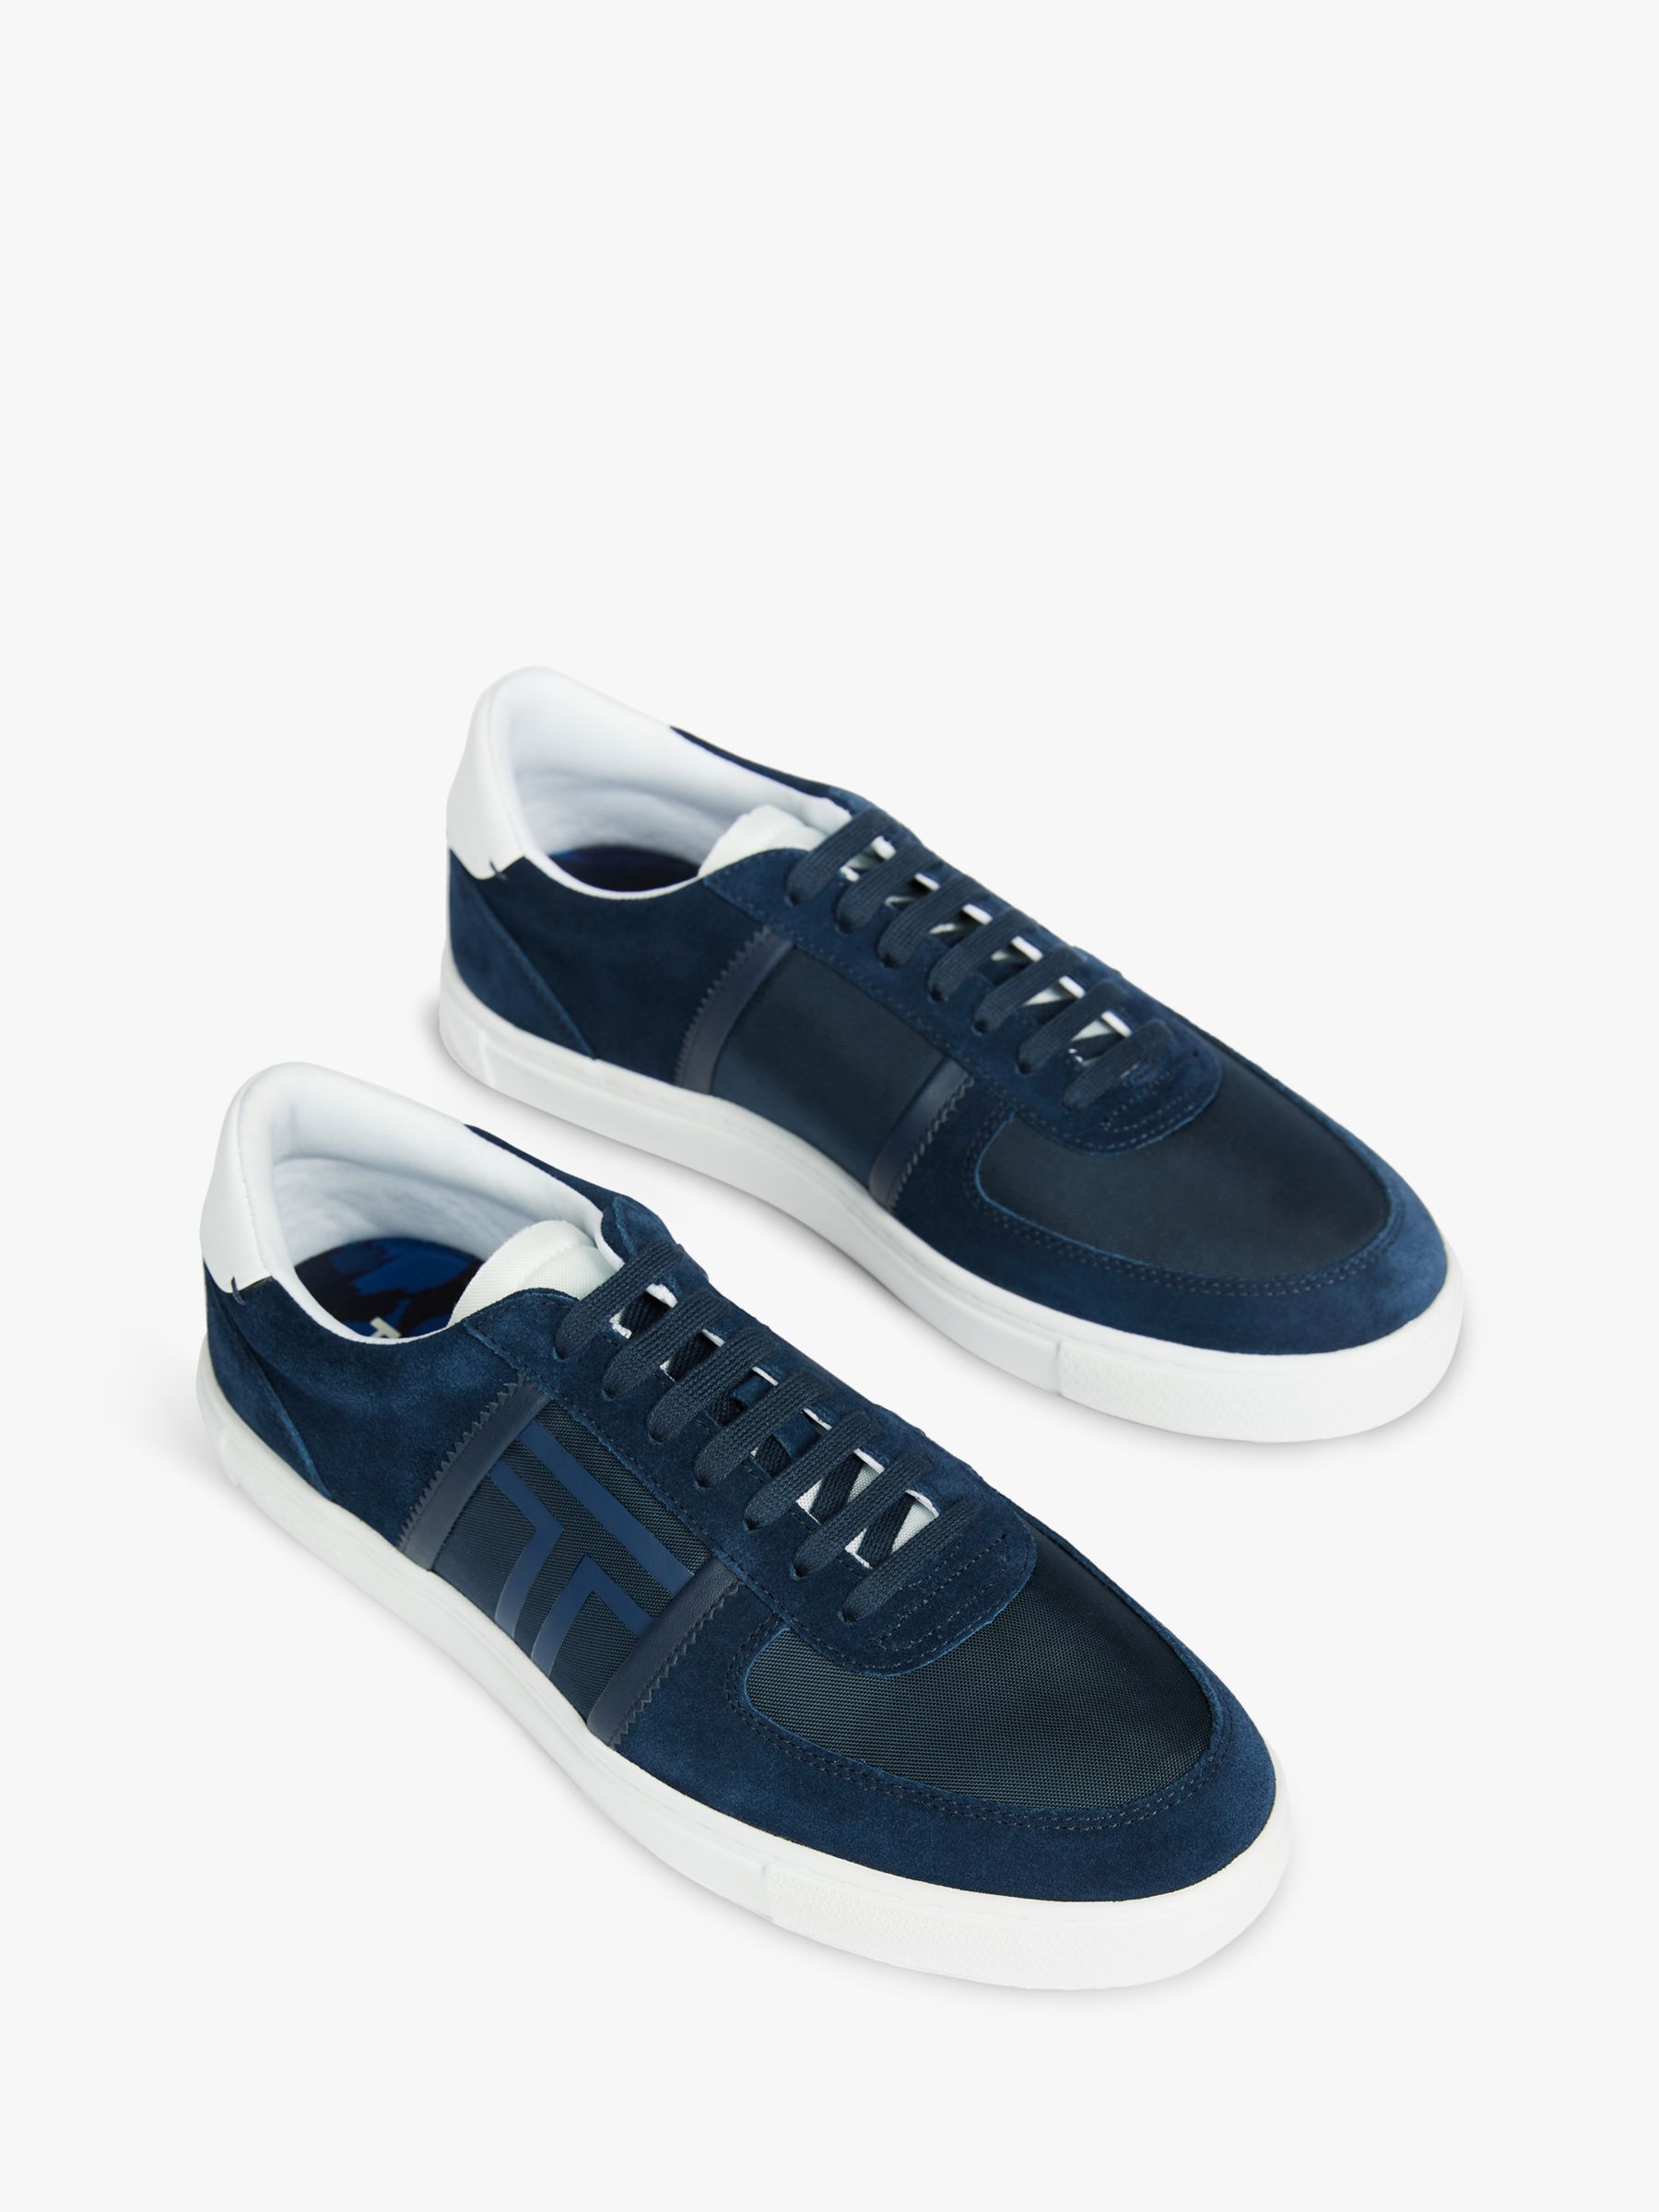 Ted Baker Laurol Trainers, Navy at John Lewis & Partners